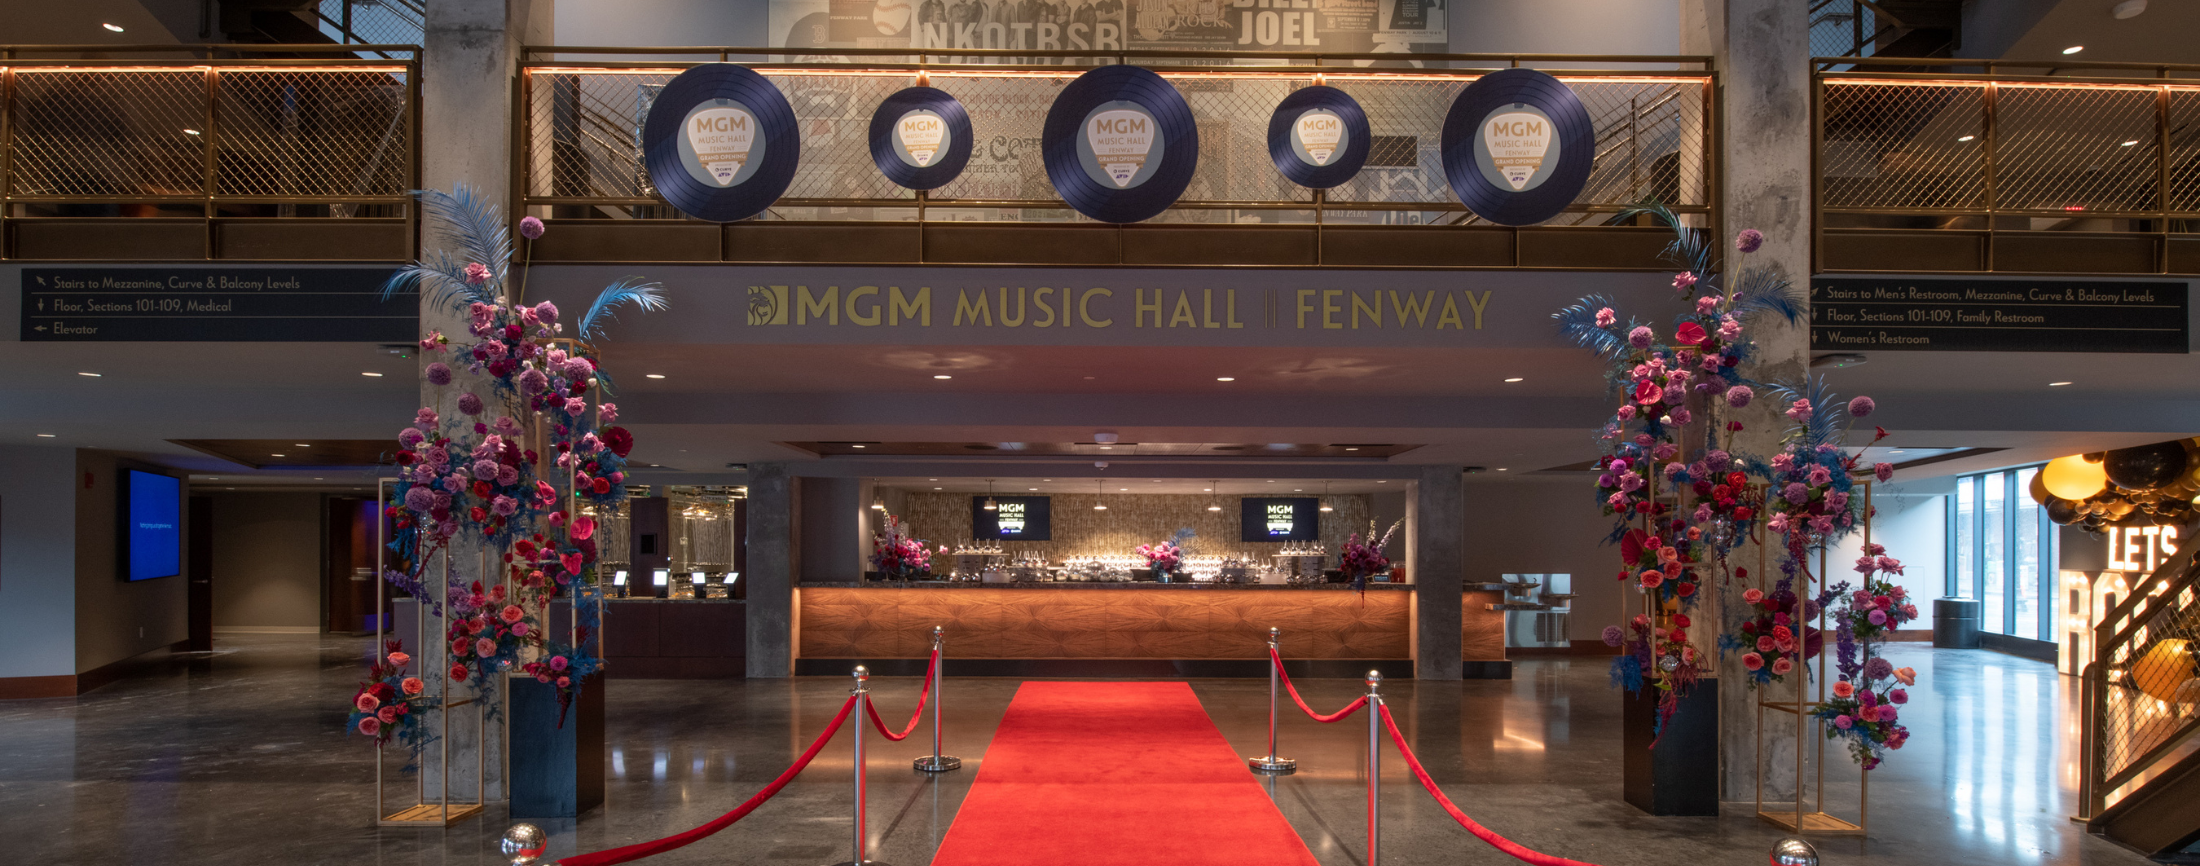 Spotlight on Boston’s Hottest New Music Venue: MGM Music Hall at Fenway